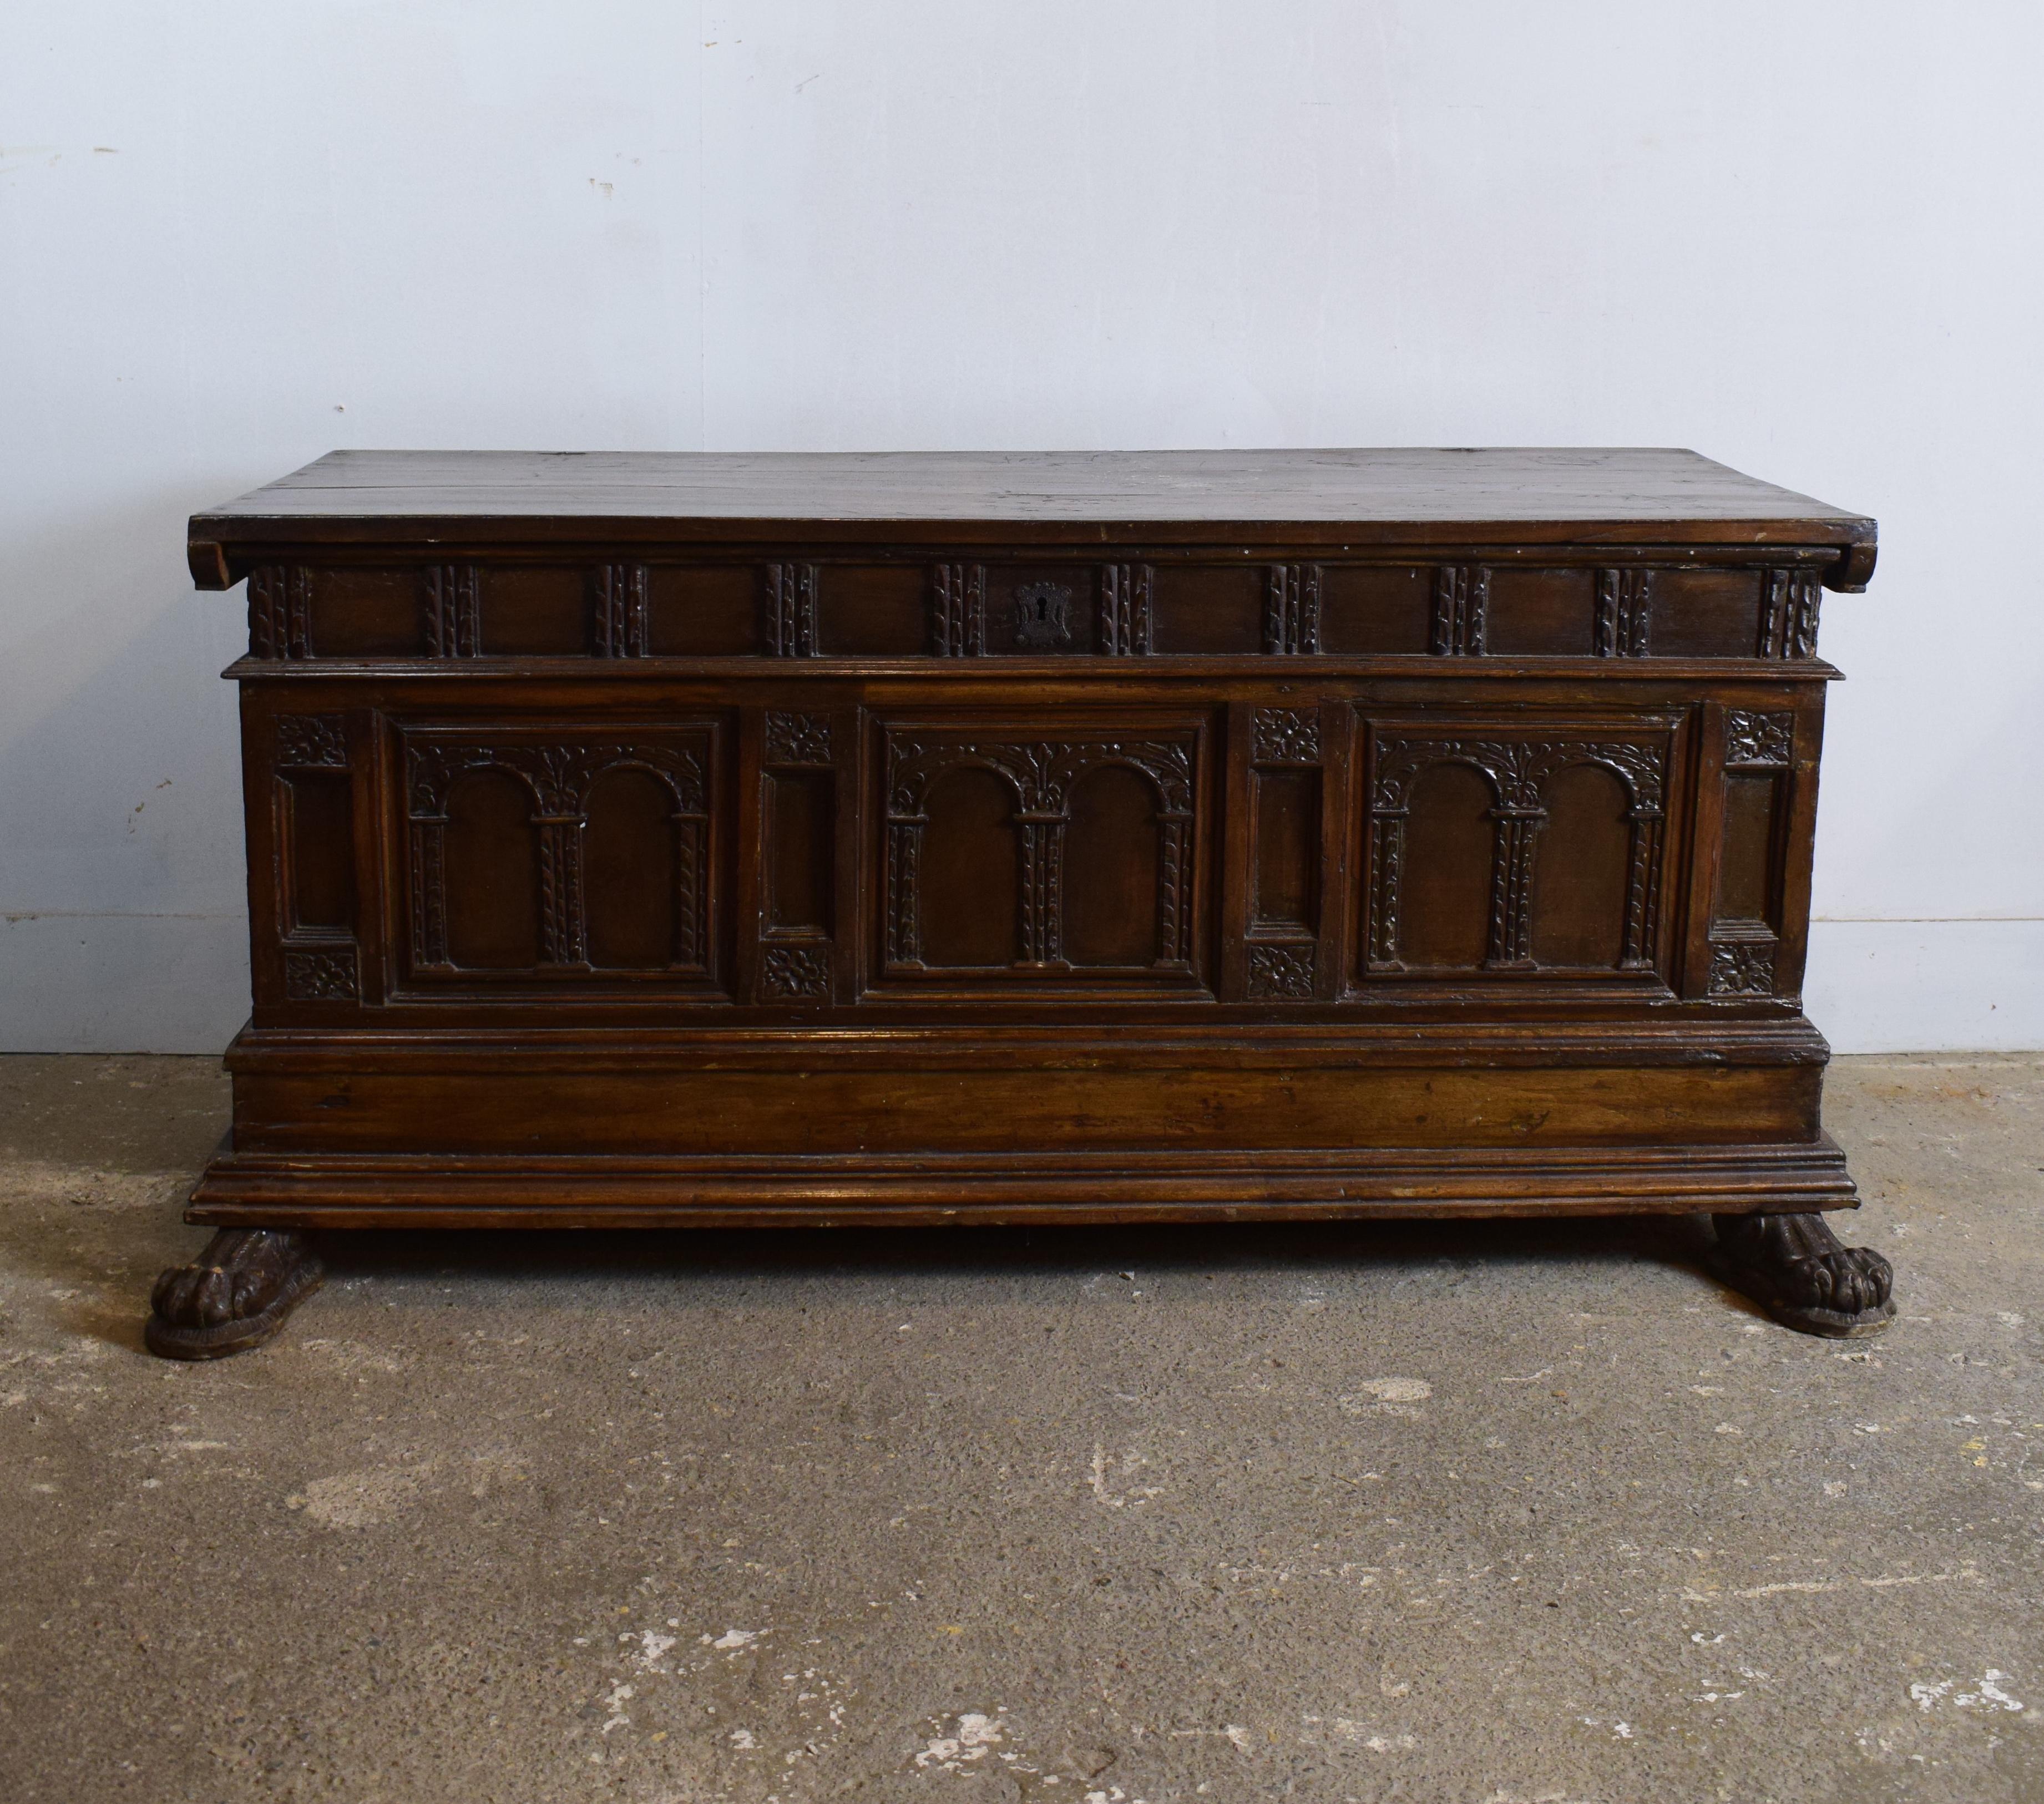 This Spanish features a long rectangular shape body which has a geometrical design carved into the side panels. In the front underneath the coffer are two carved paw feet that project out. The trunk interior offers a large open storage space which